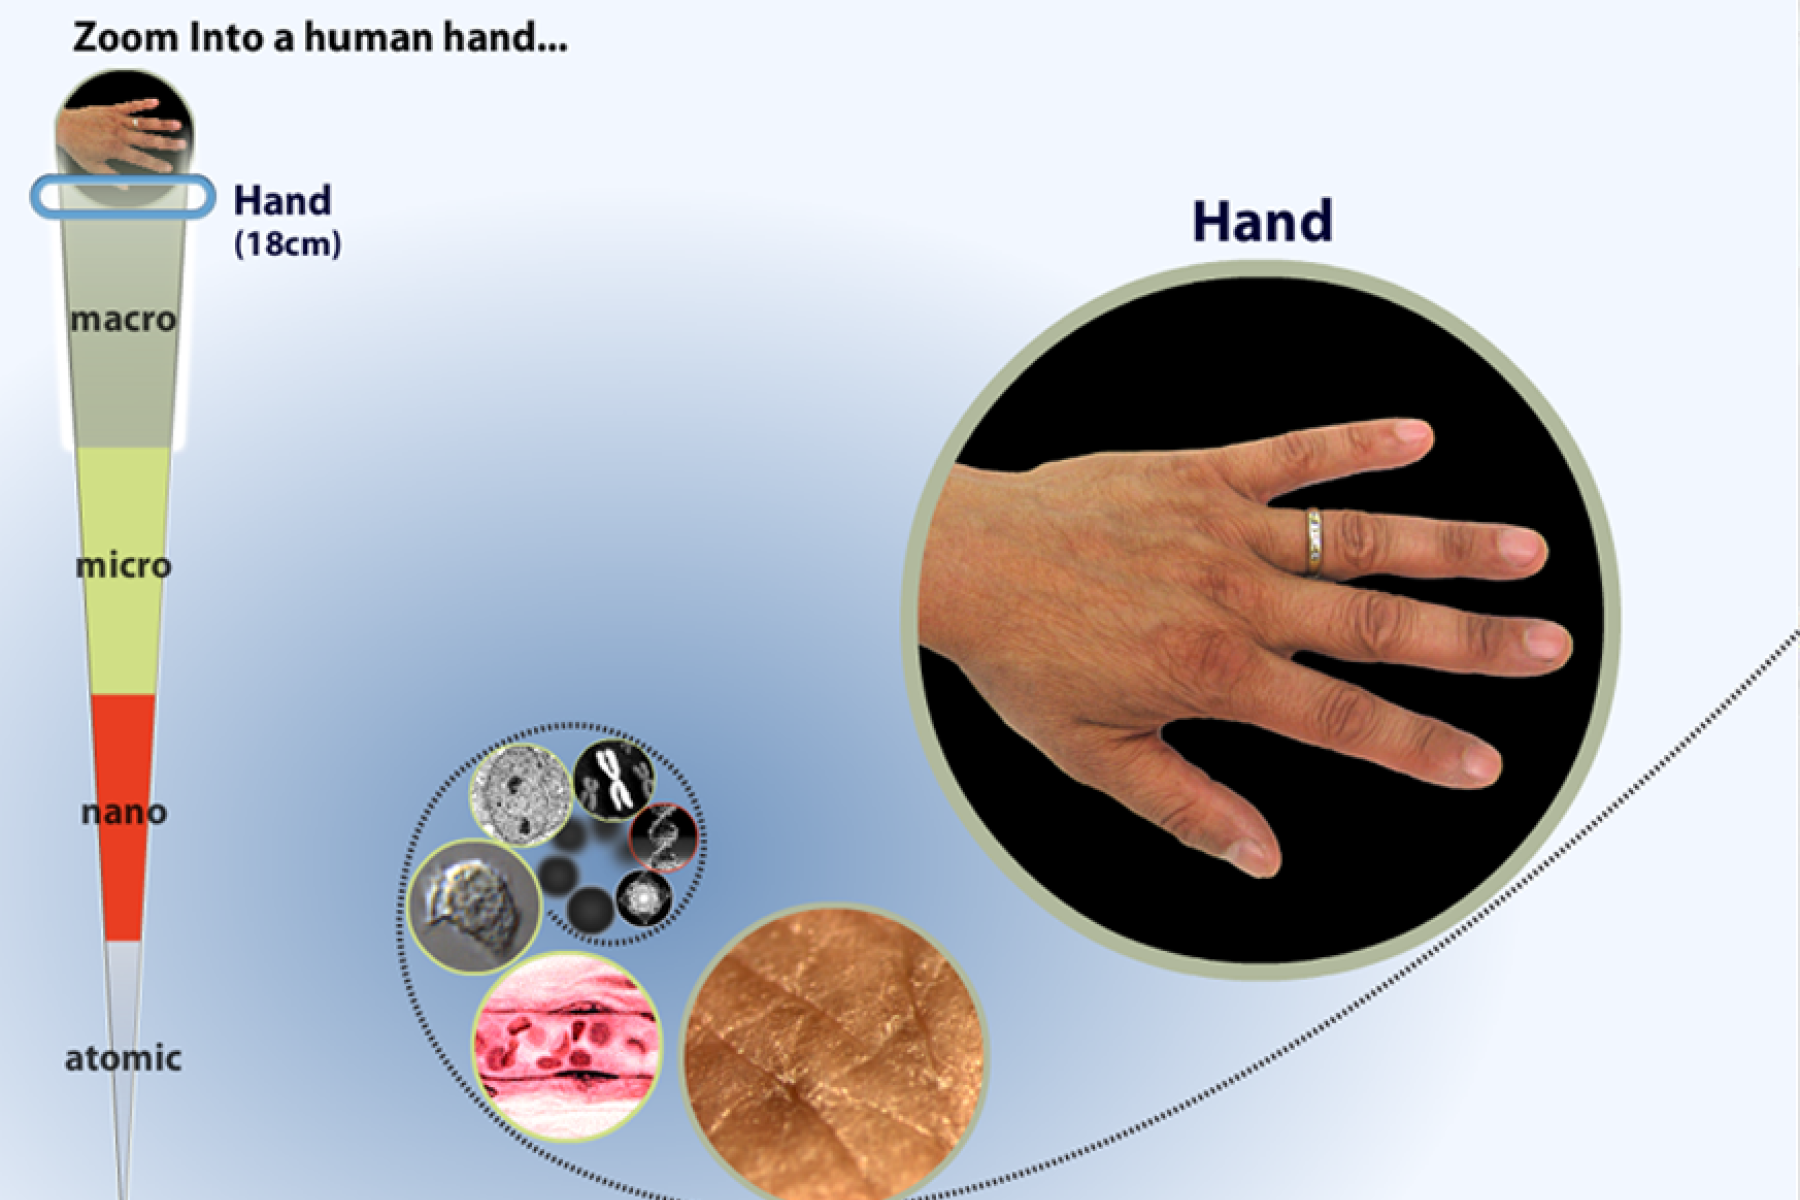 A screenshot of the zoom into a human hand interactive starting with a hand.